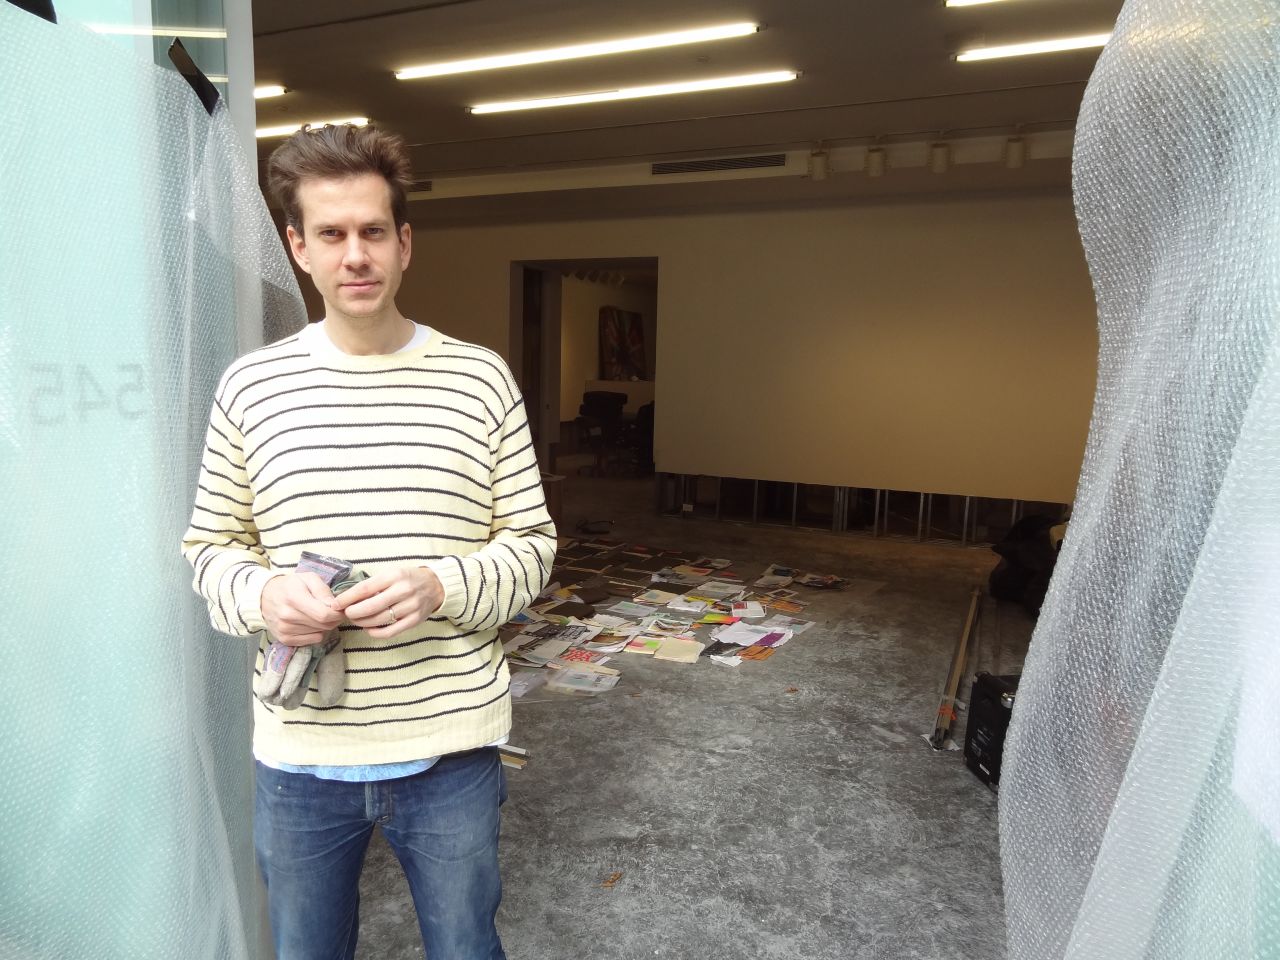 Gallery owner Leo Koenig stands outside his space during repairs.